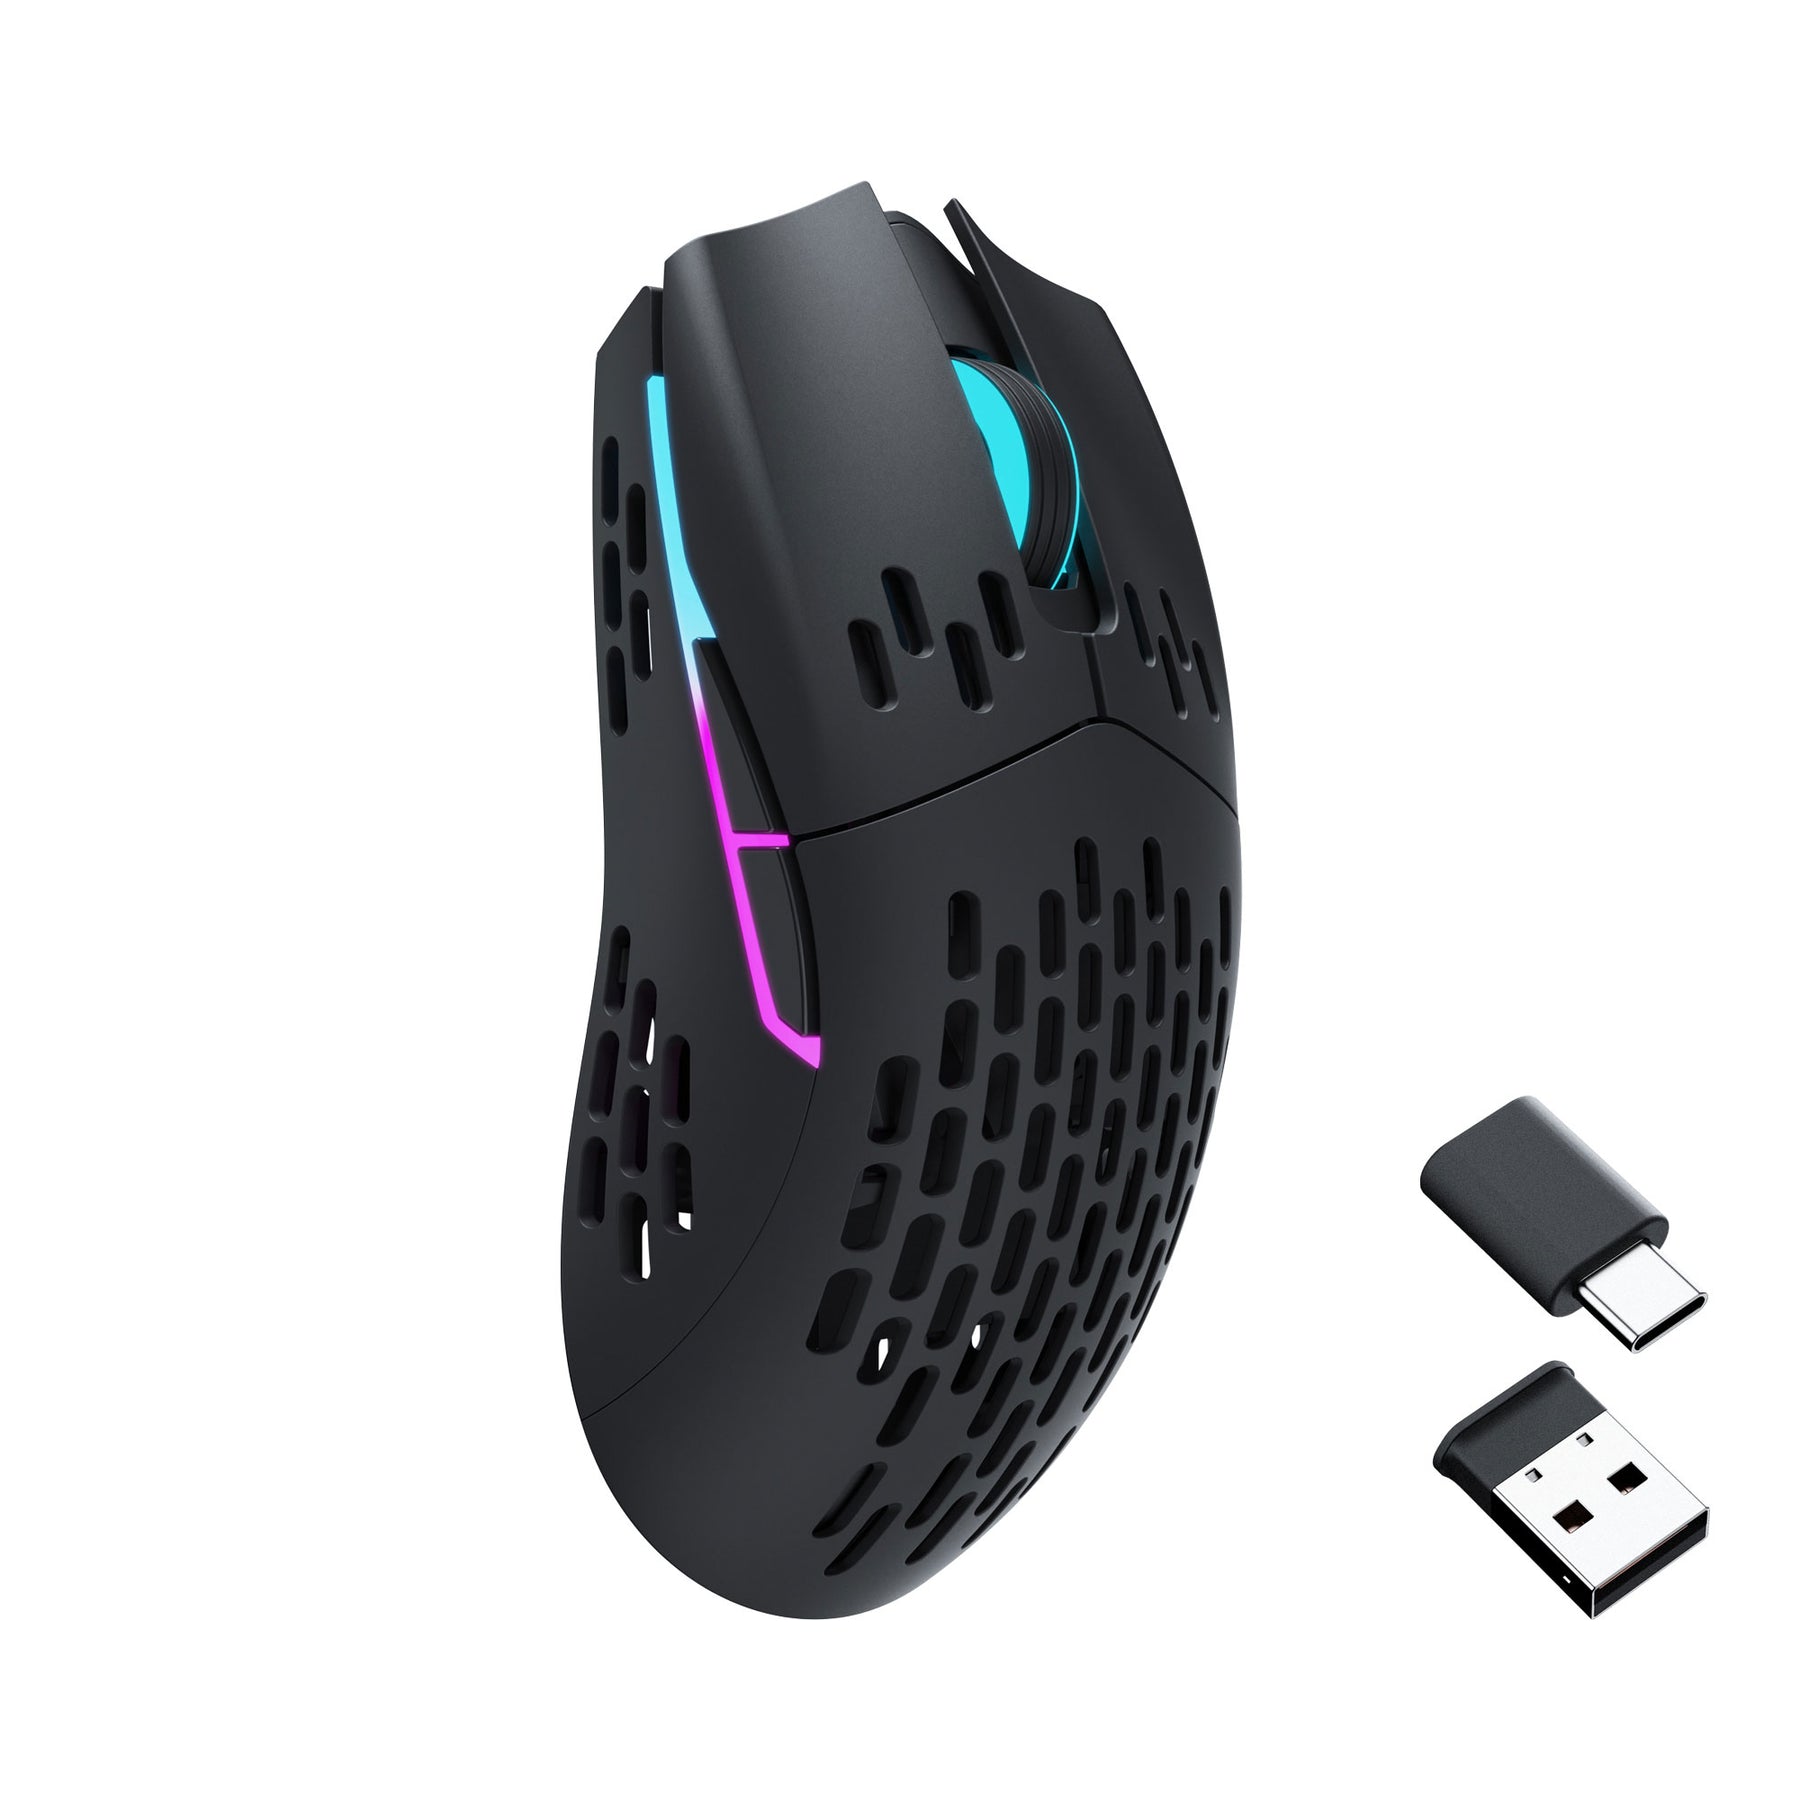 The CHEAPEST Pixart 3395 Gaming Mouse I've Seen and Tried!